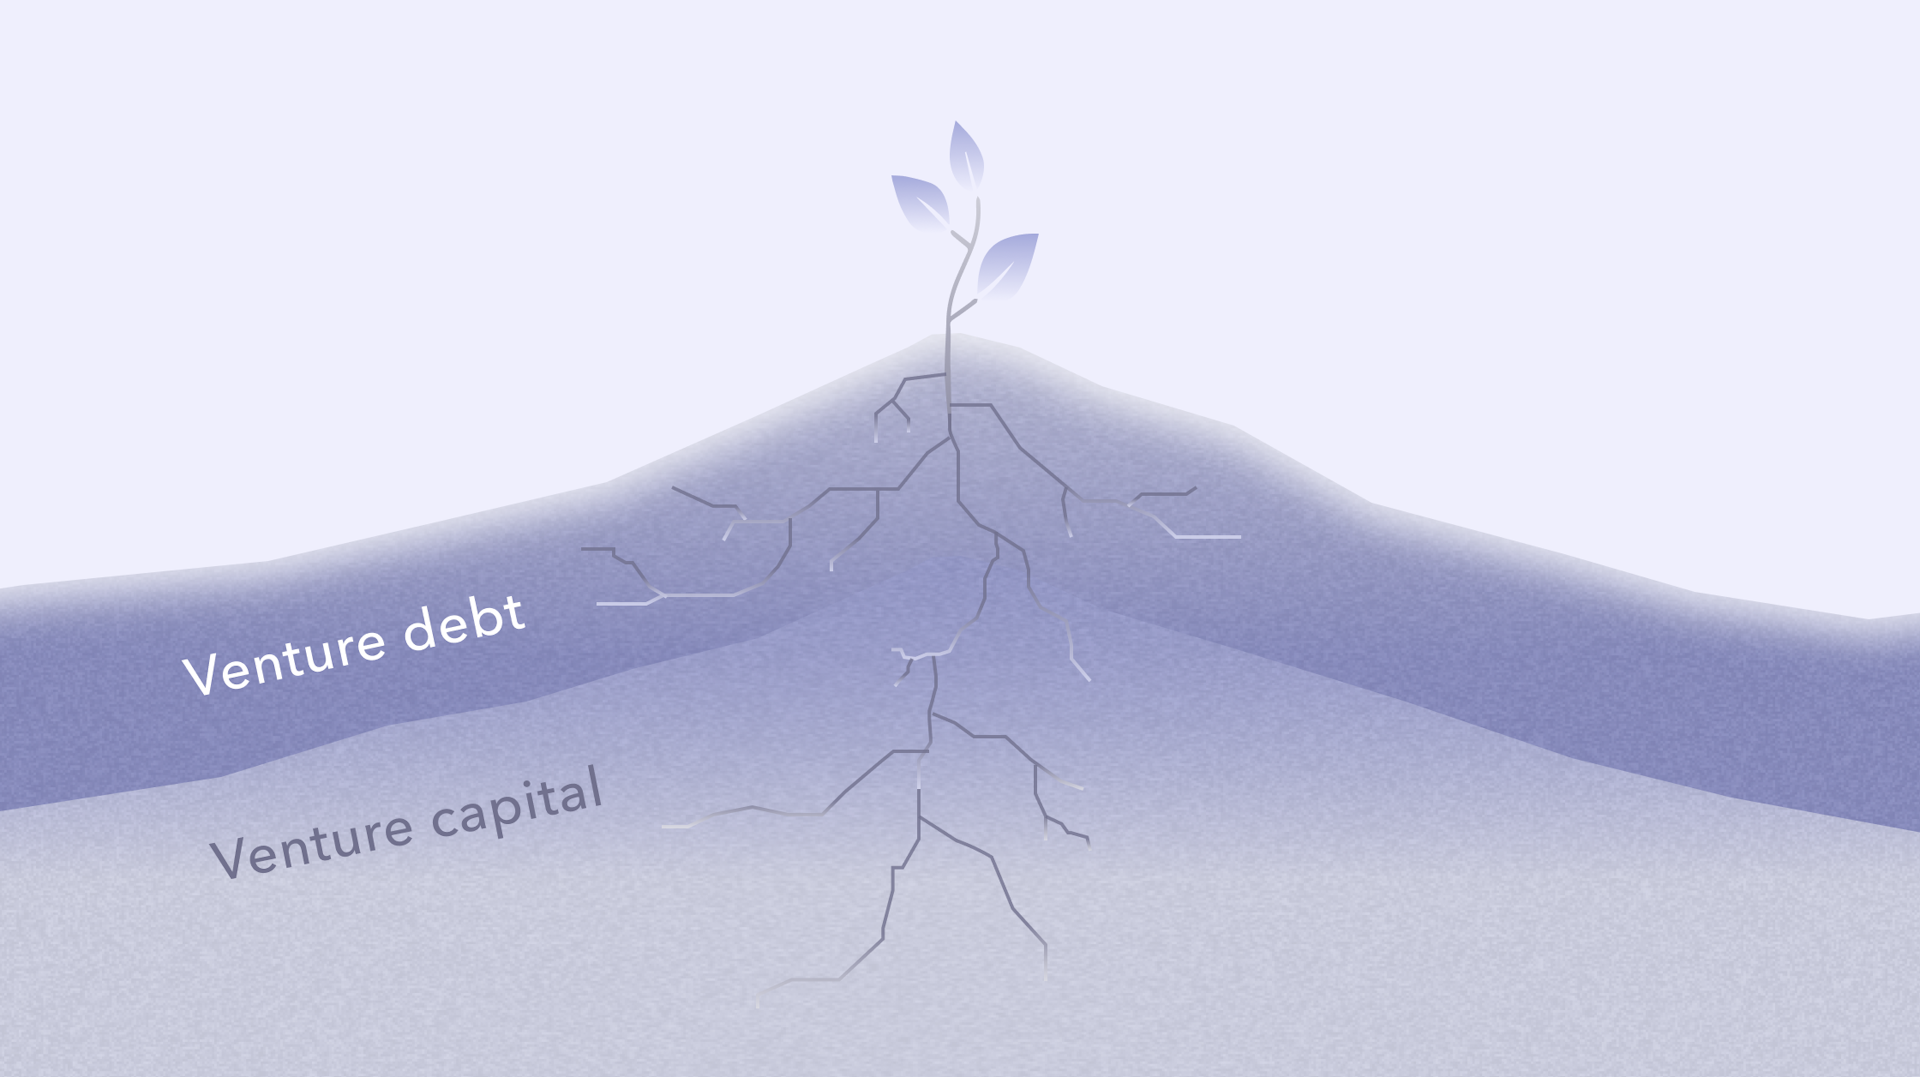 When should you get venture debt, and how is it different from venture capital? 